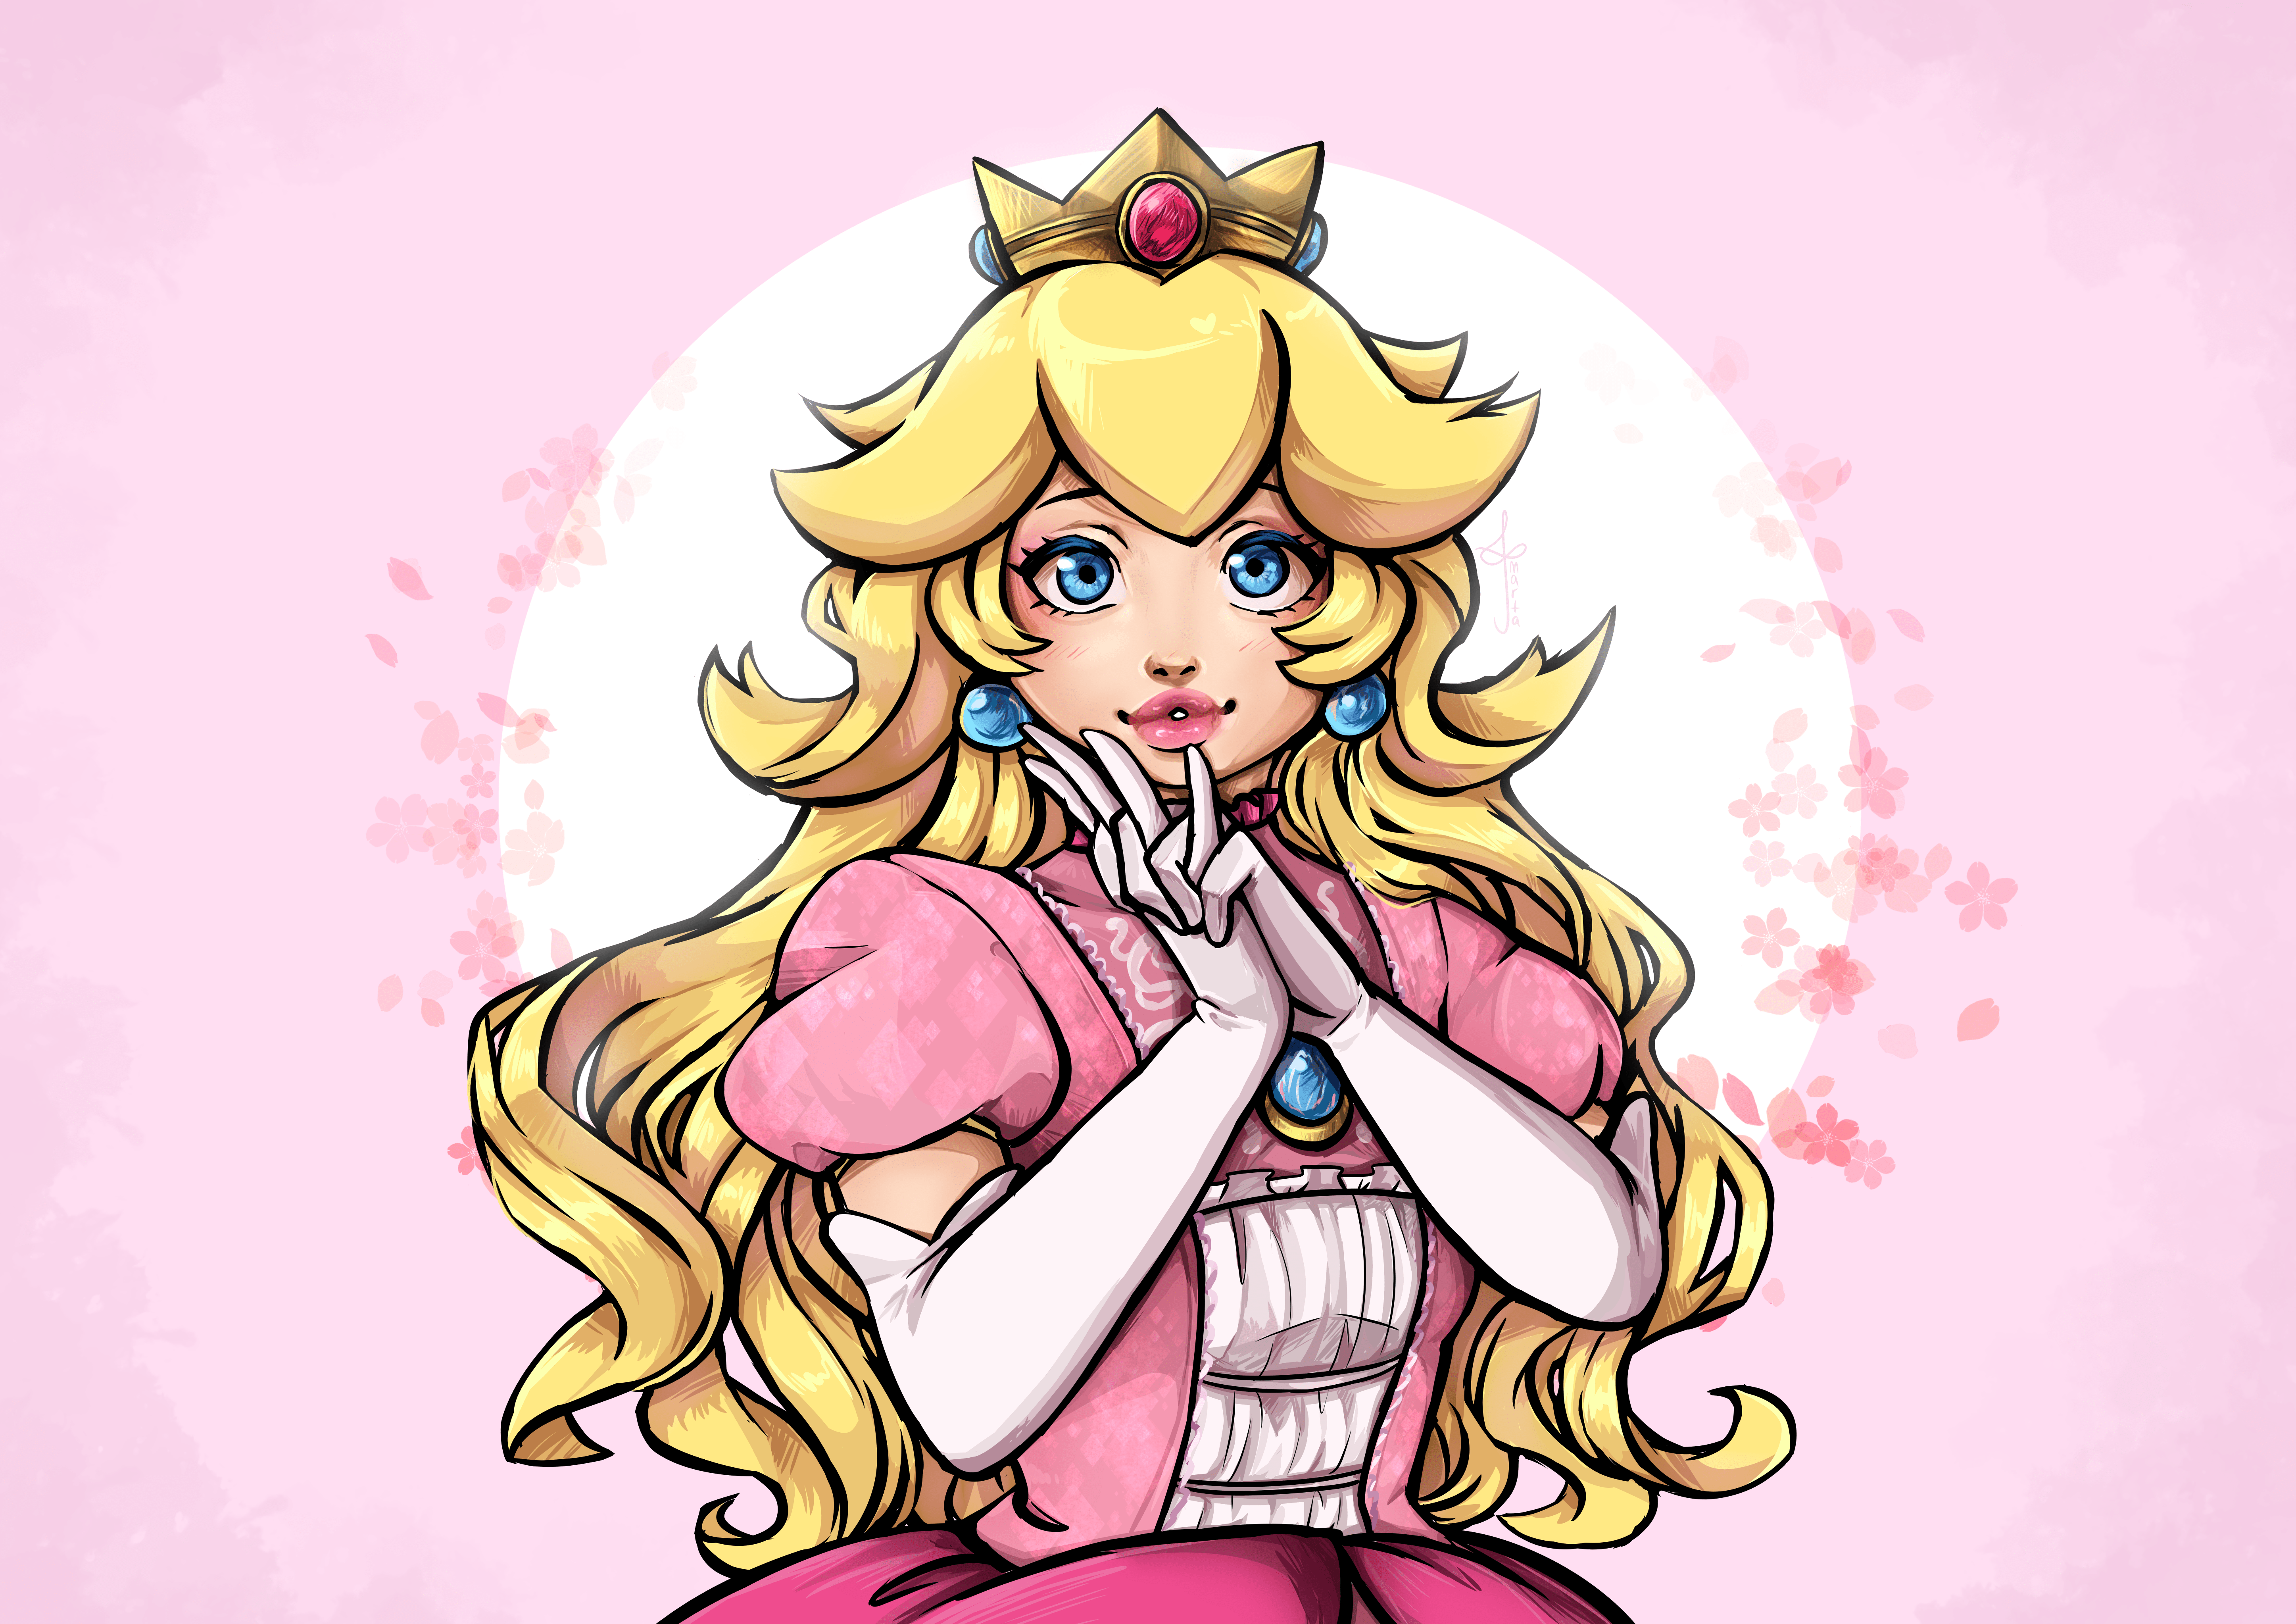 Princess Peach from the Mario franchise, wearing a pink dress and a tiara. - Princess Peach